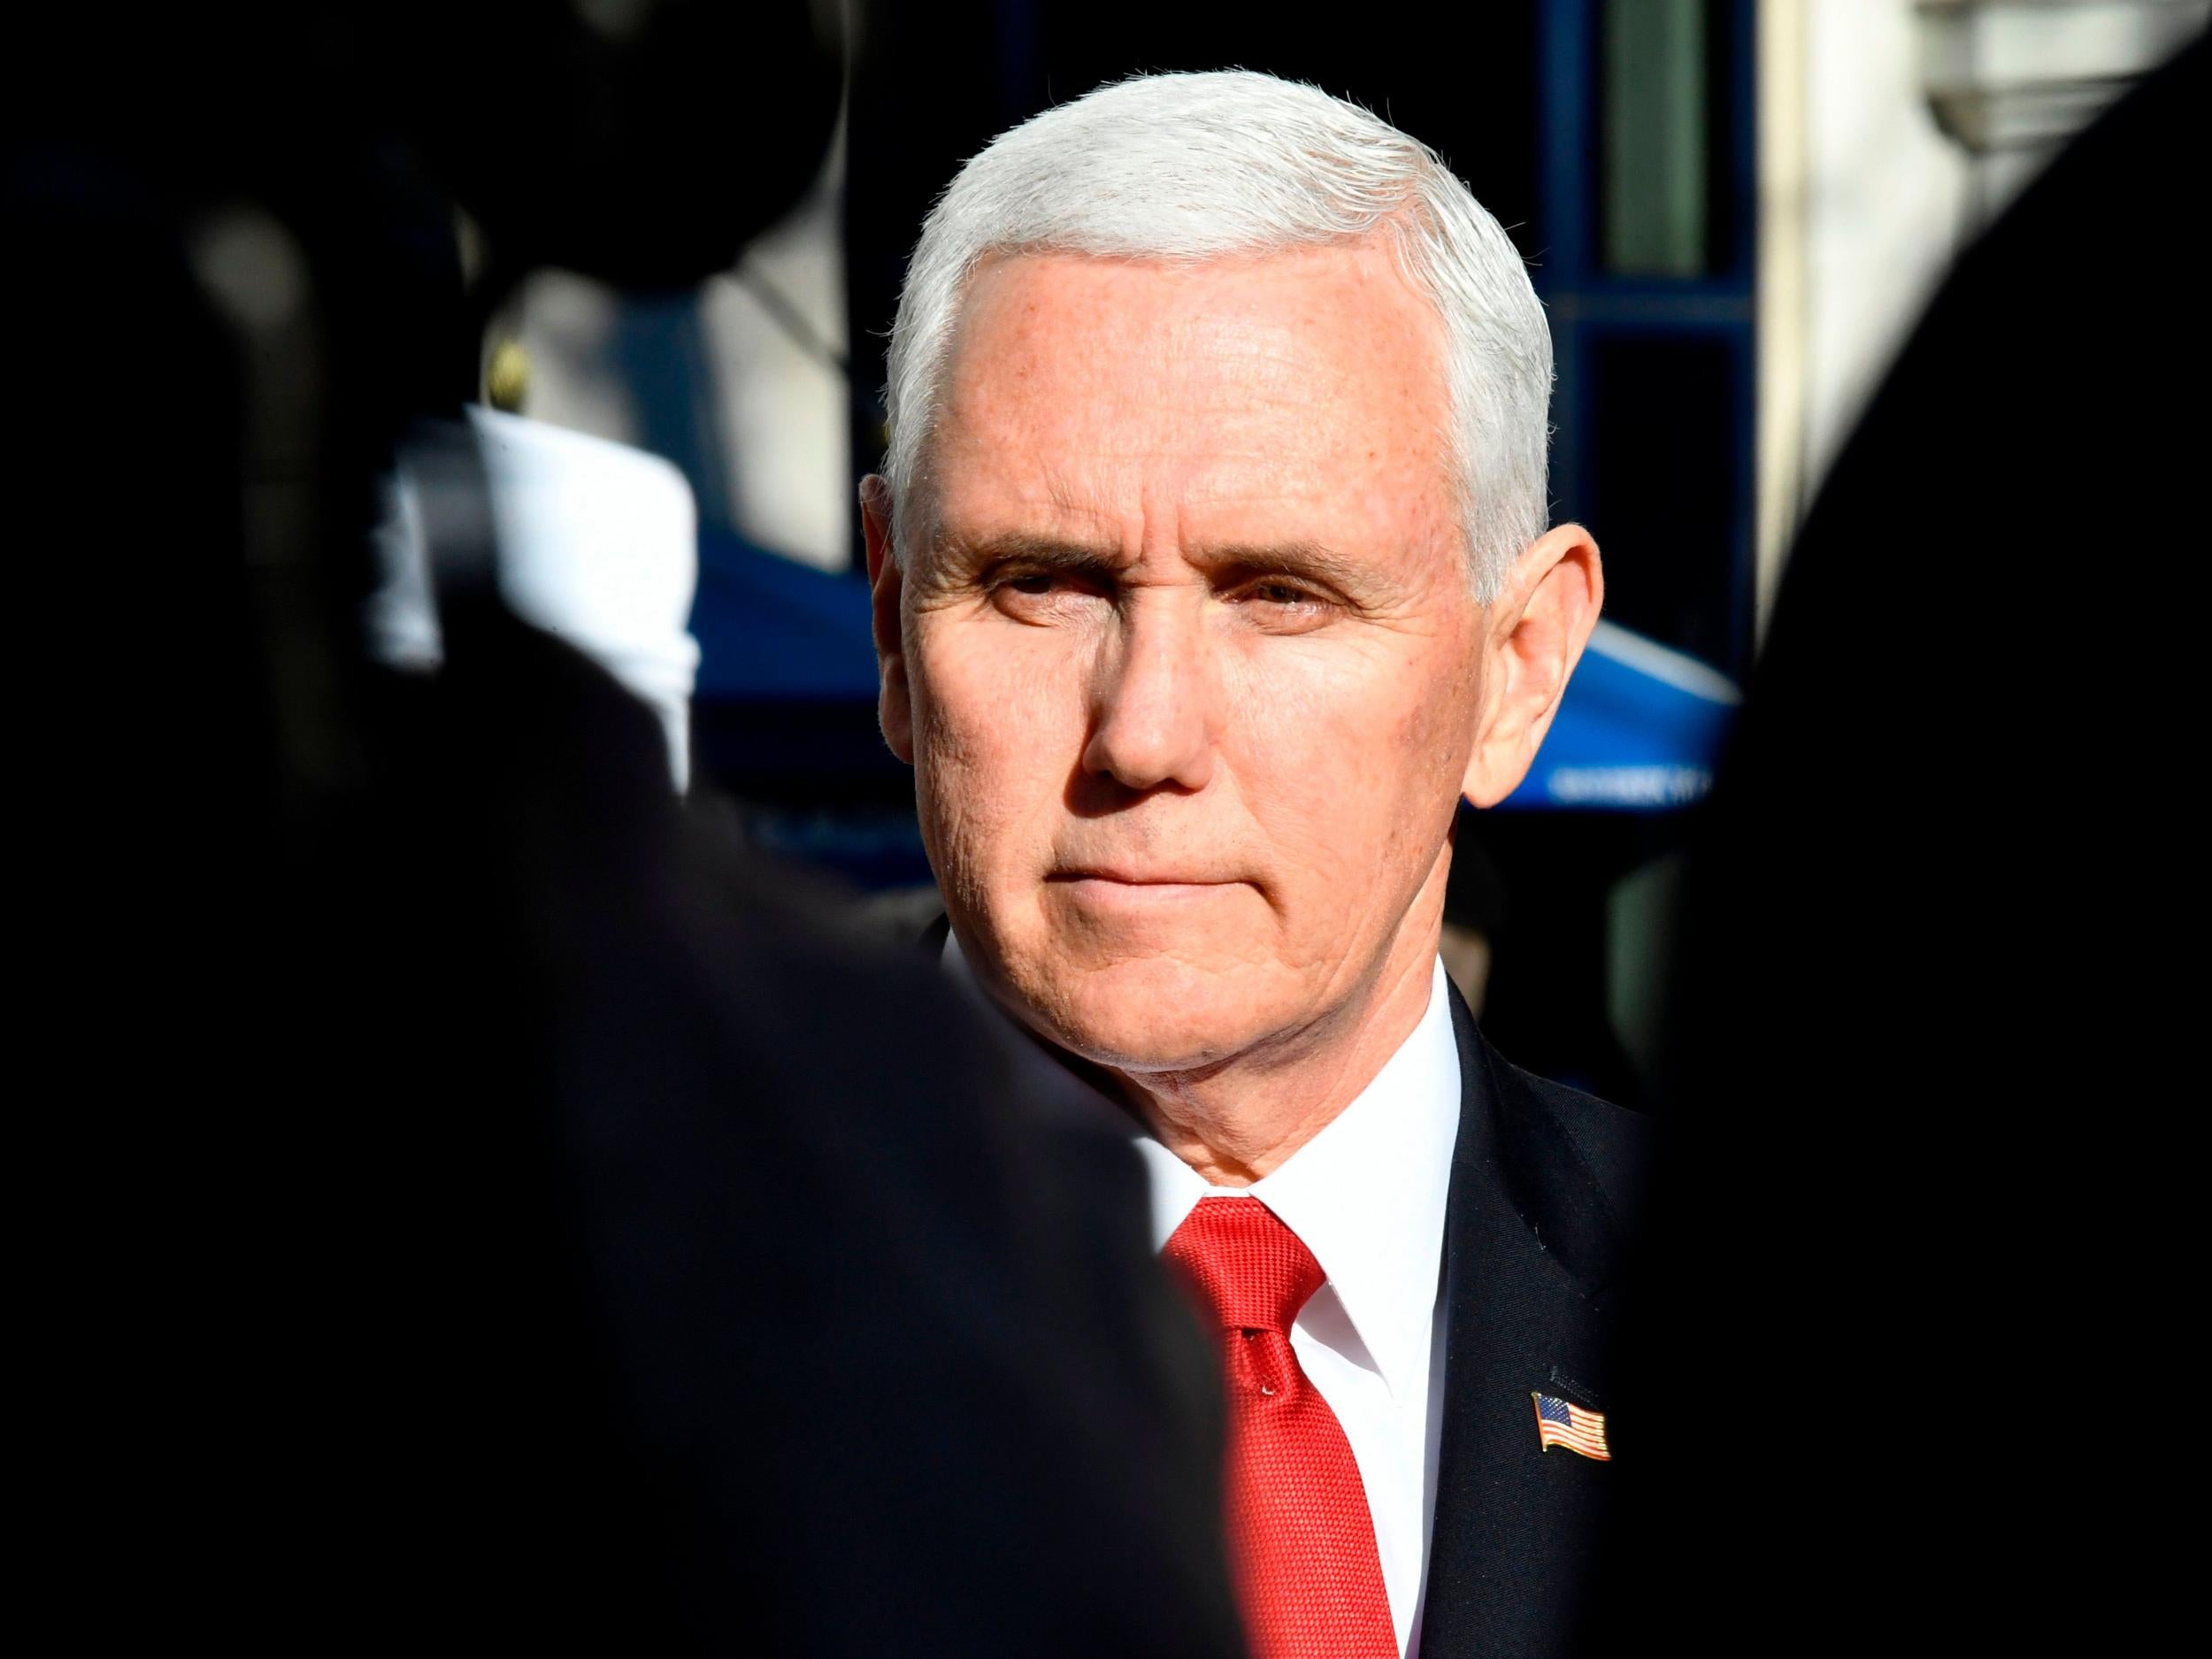 Mike Pence abruptly returns to White House as reports of 'emergency' situation spark online misinformation